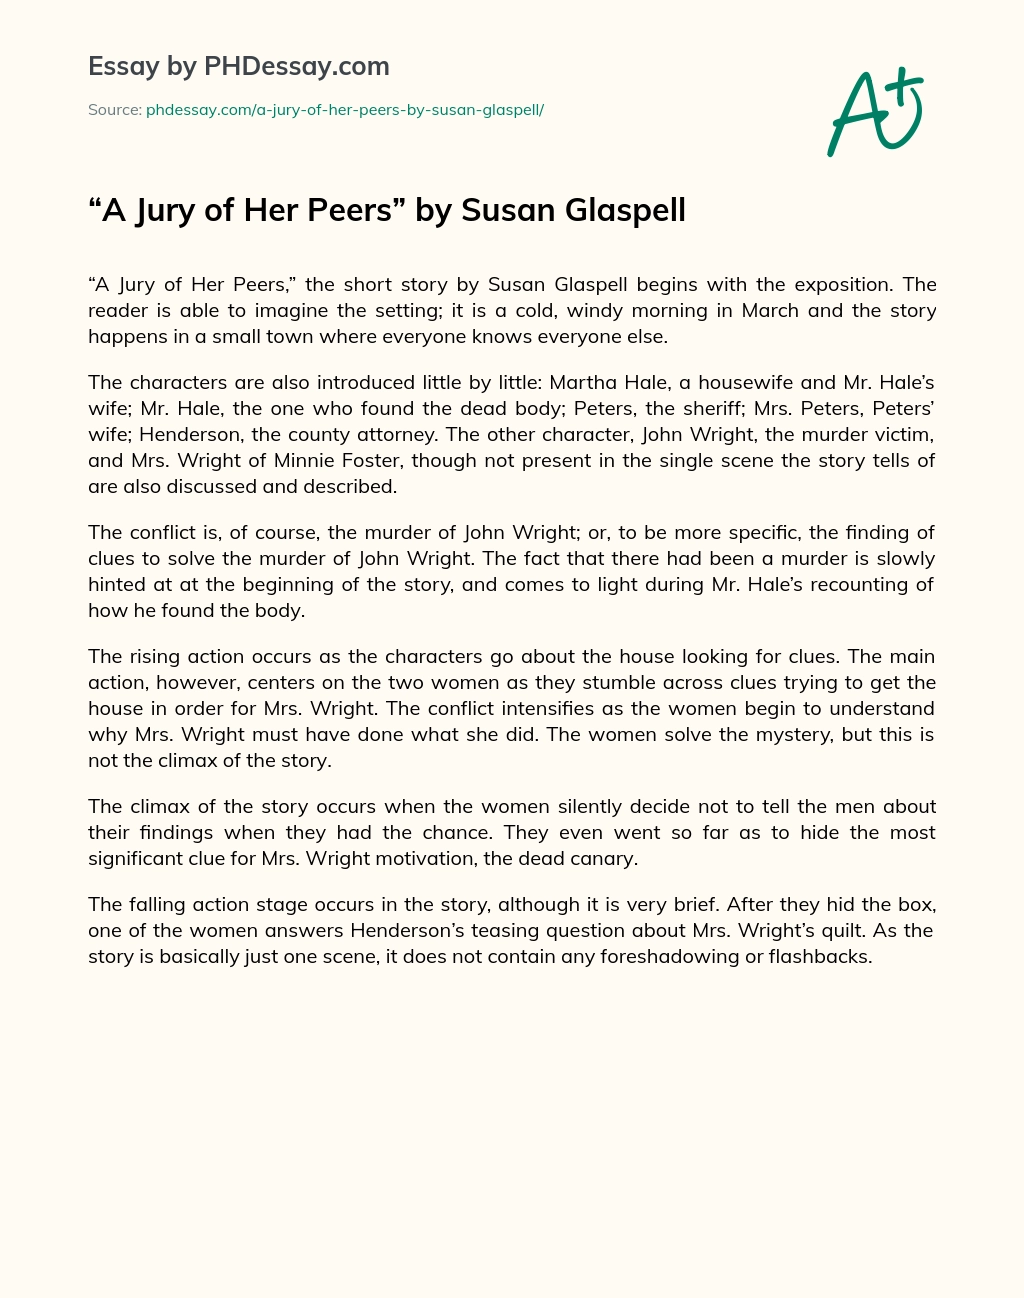 a jury of her peers by susan glaspell sparknotes